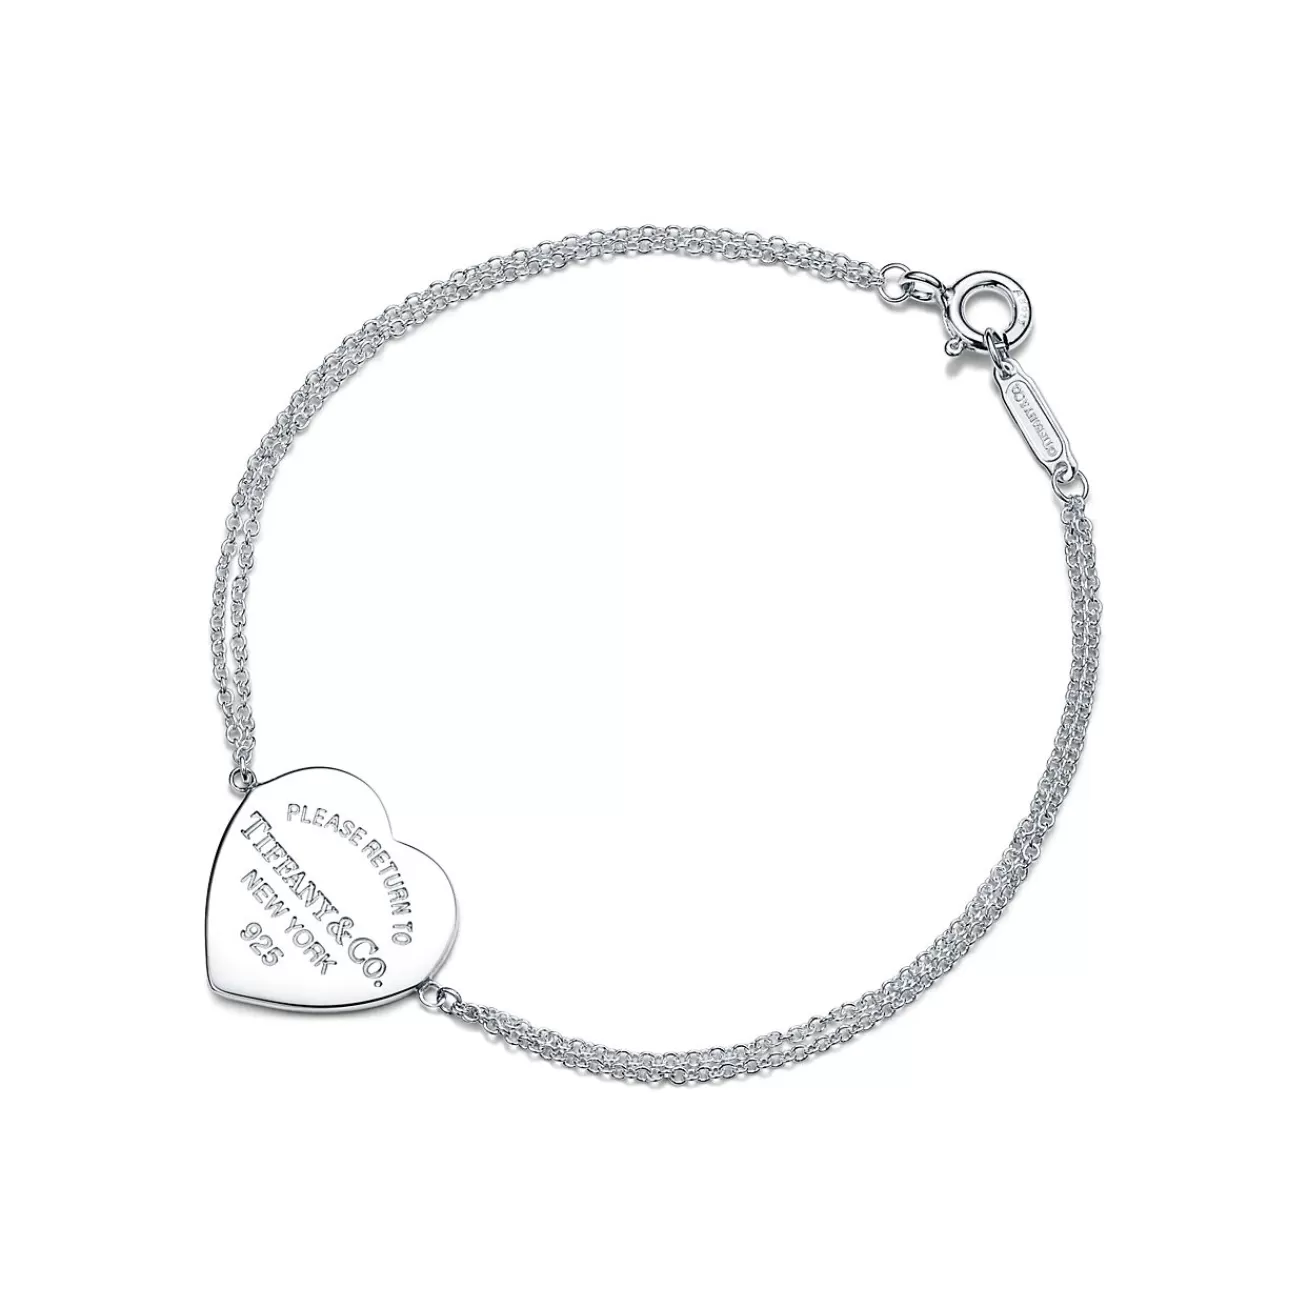 Tiffany & Co. Return to Tiffany® Heart Tag Double Chain Bracelet in Silver, Small | ^ Bracelets | Sterling Silver Jewelry